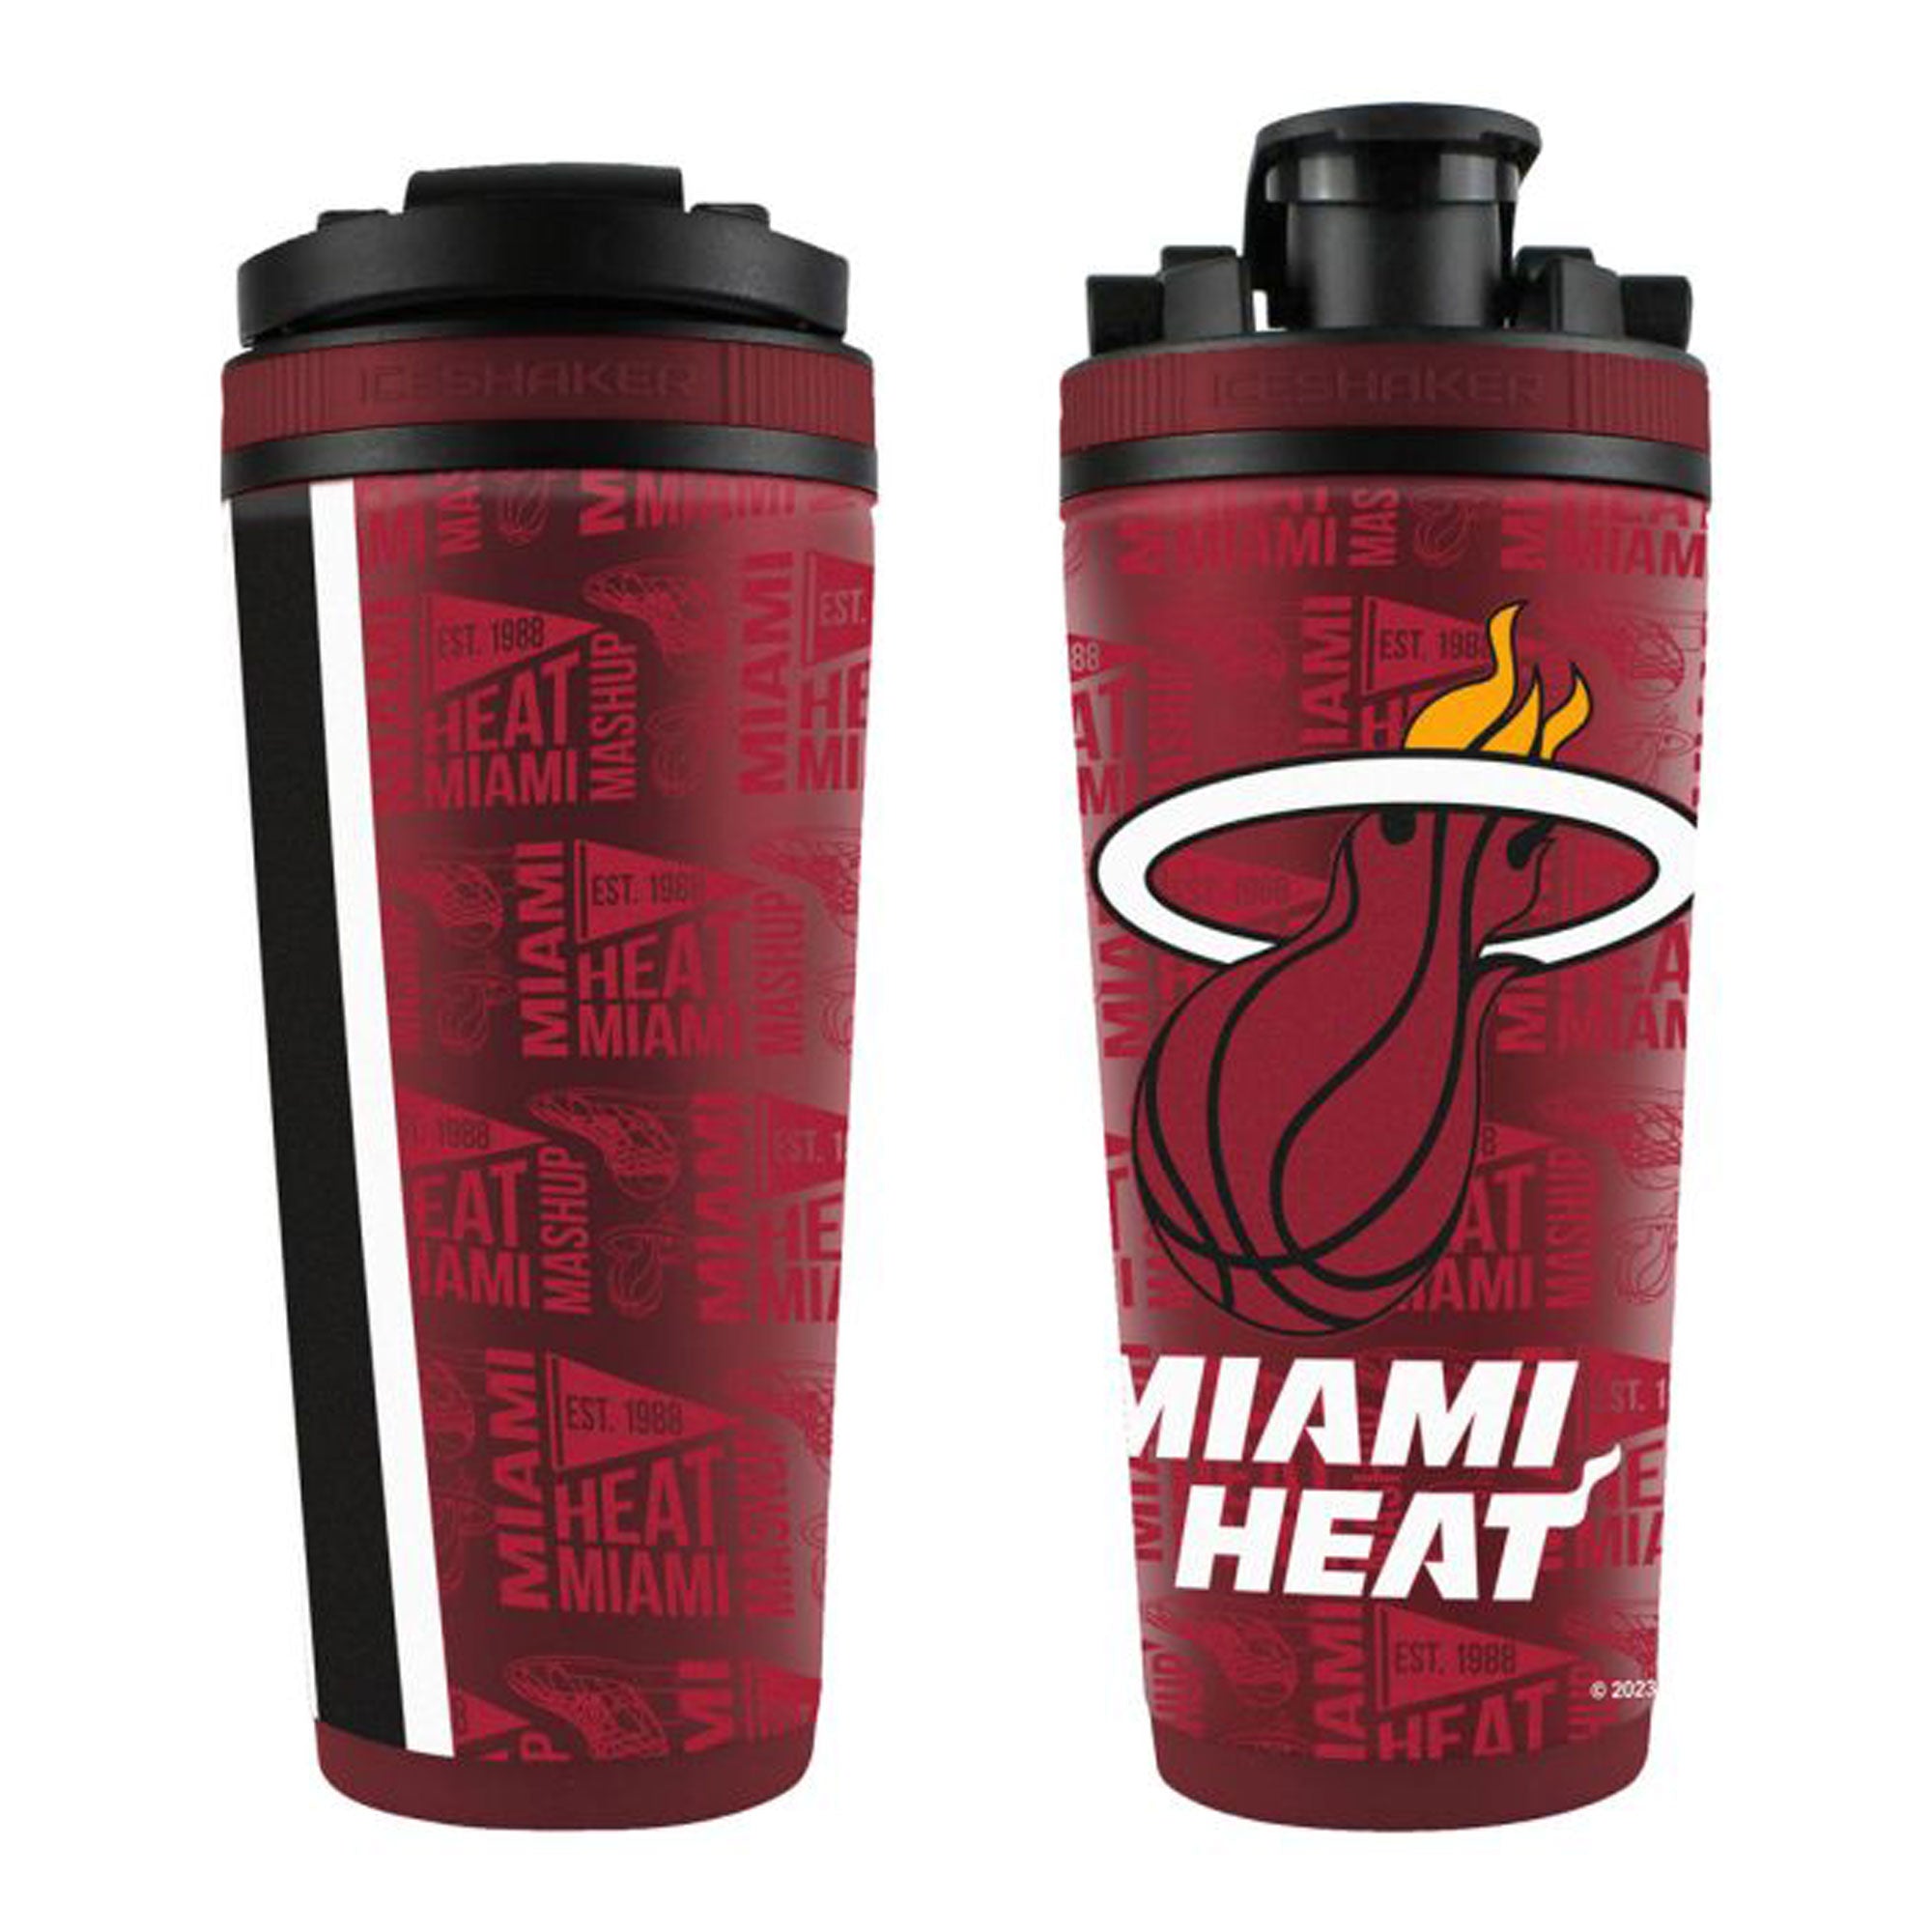 Officially Licensed Miami Heat 4D Ice Shaker